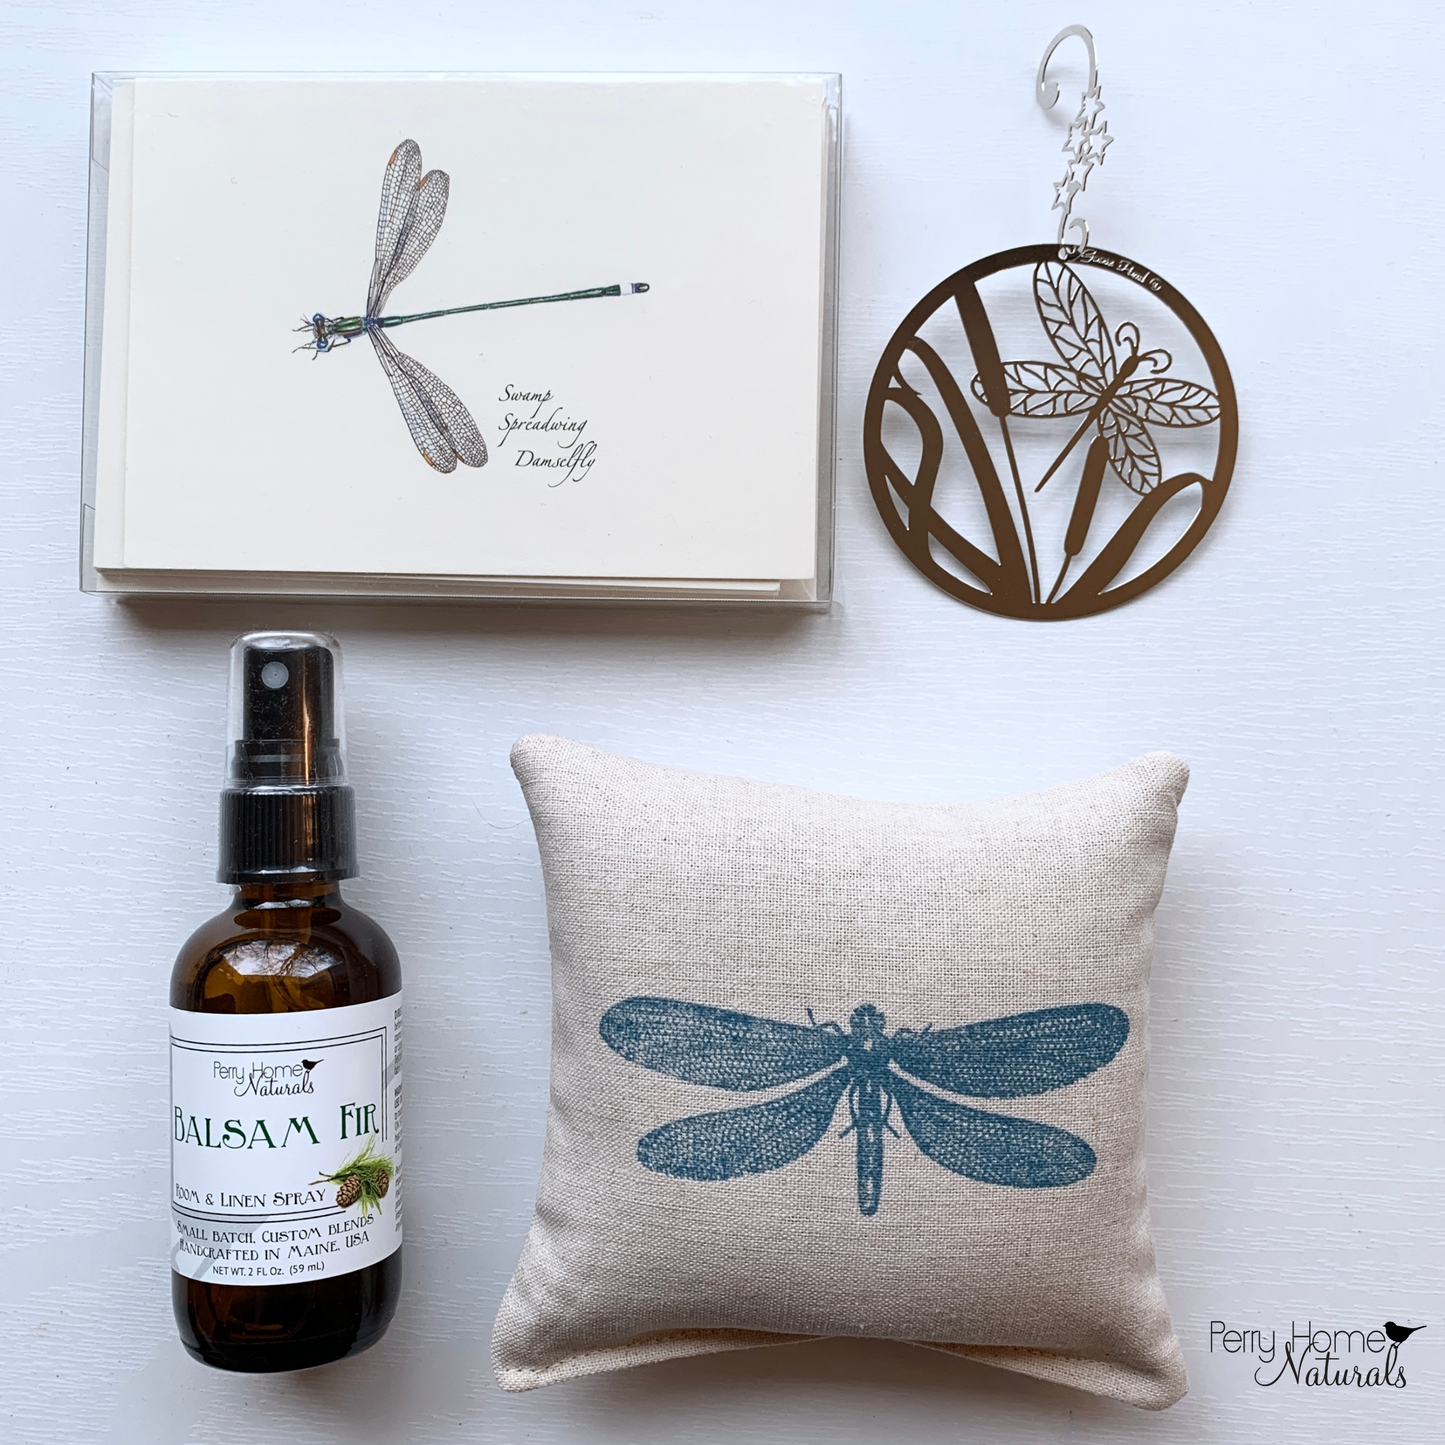 Dragonfly Nature Themed Gift Set - Balsam Fir Scents, cards, and silver ornament